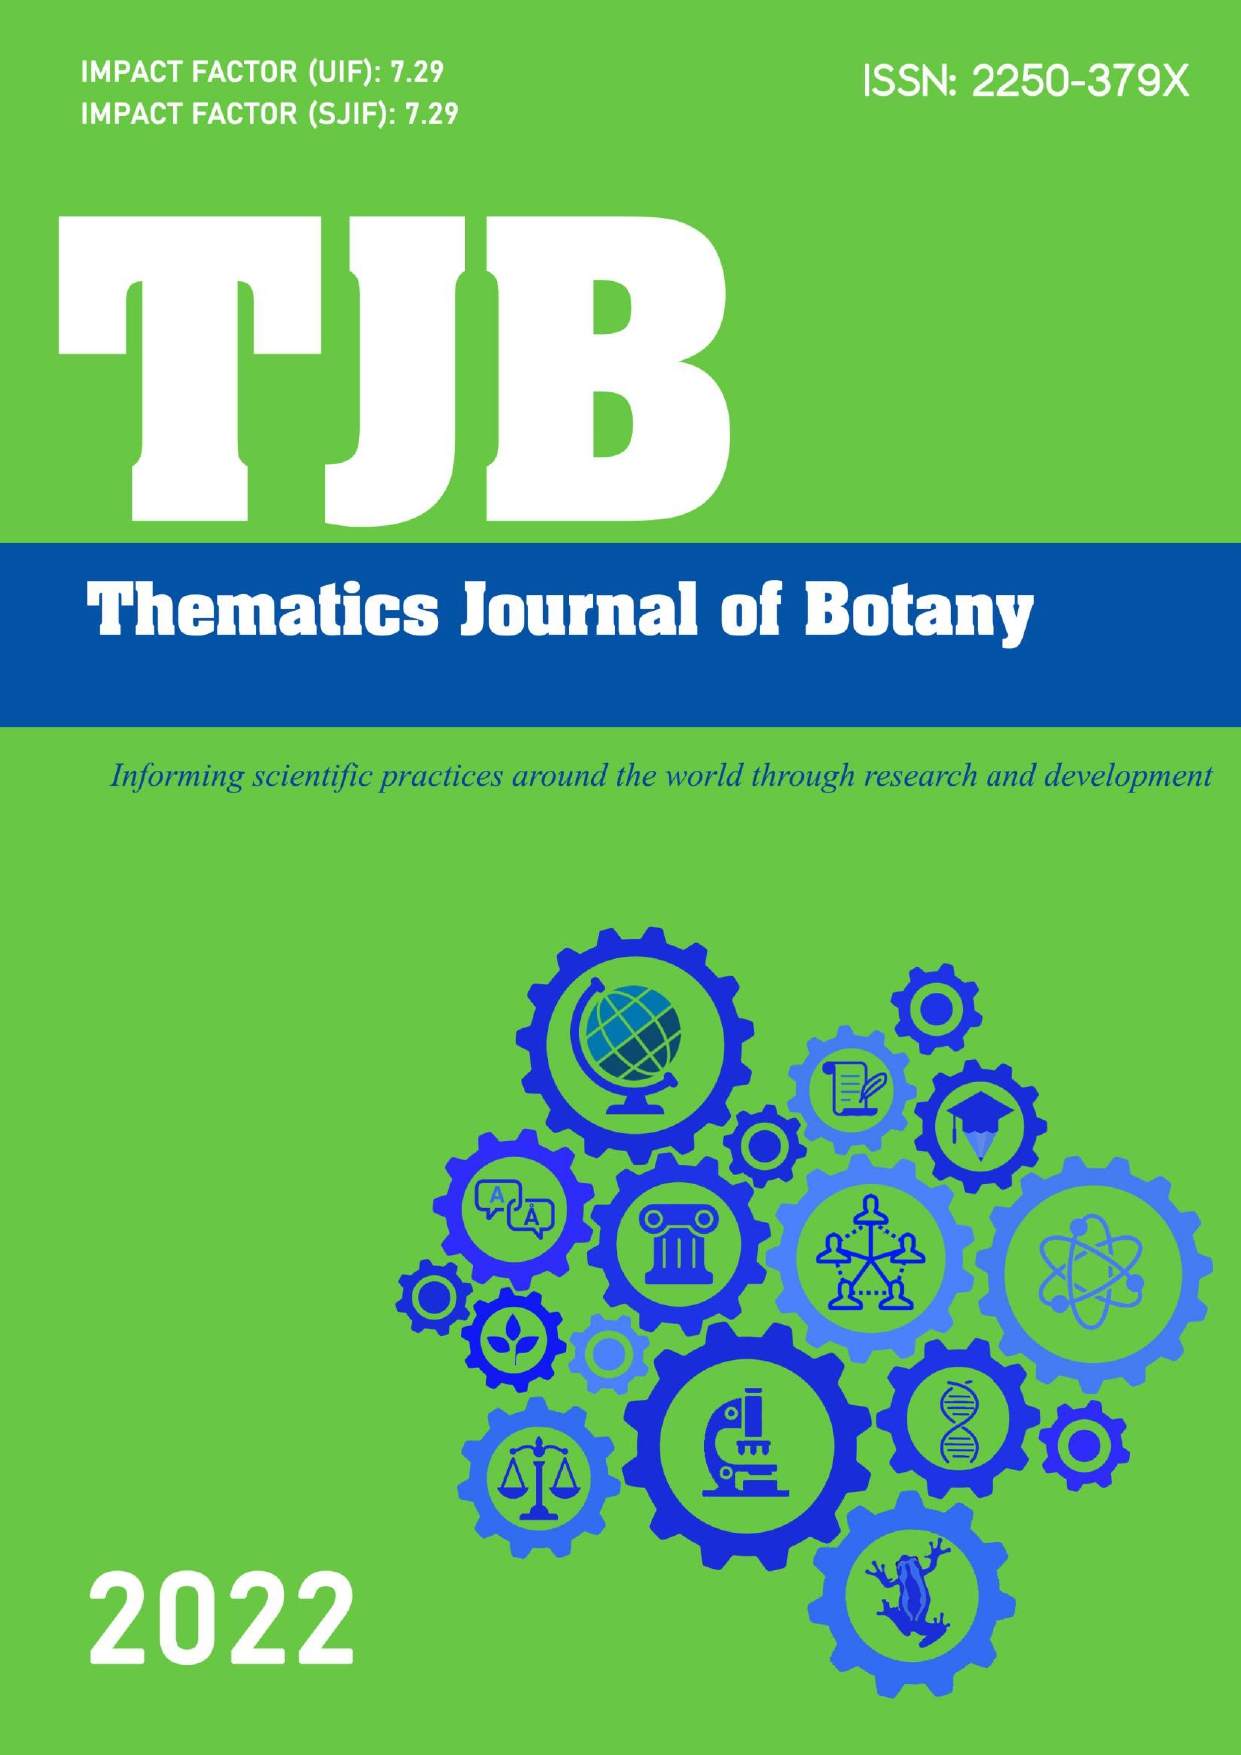 					View Vol. 6 No. 1 (2022): THEMATICS JOURNAL OF BOTANY
				